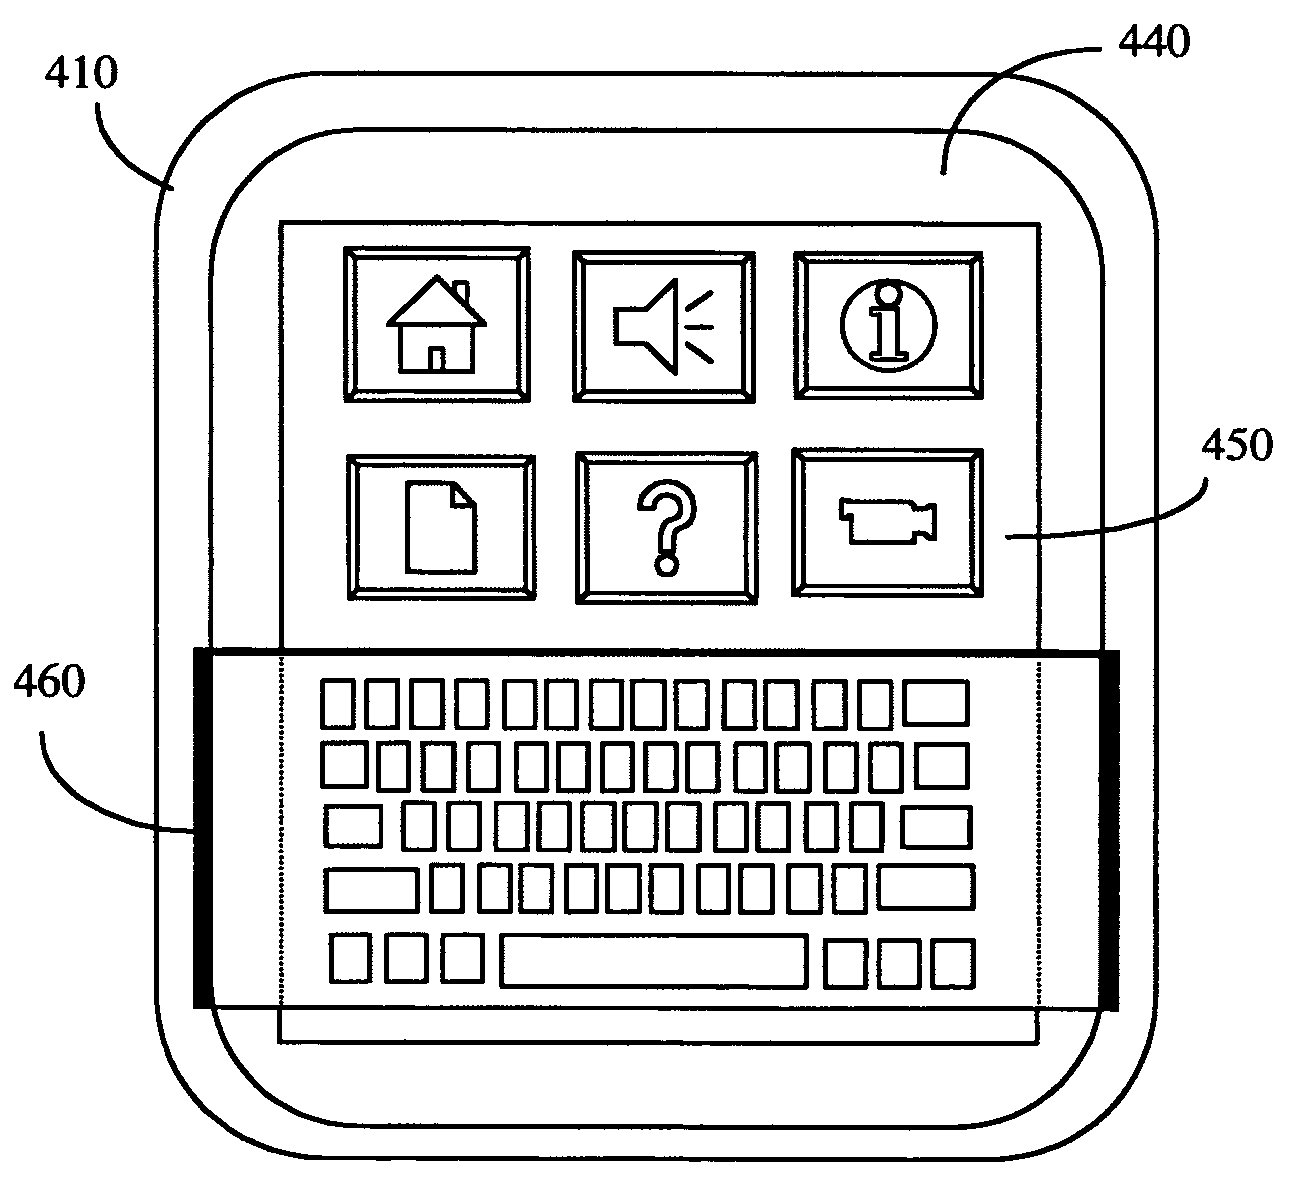 Keyboard for mobile devices